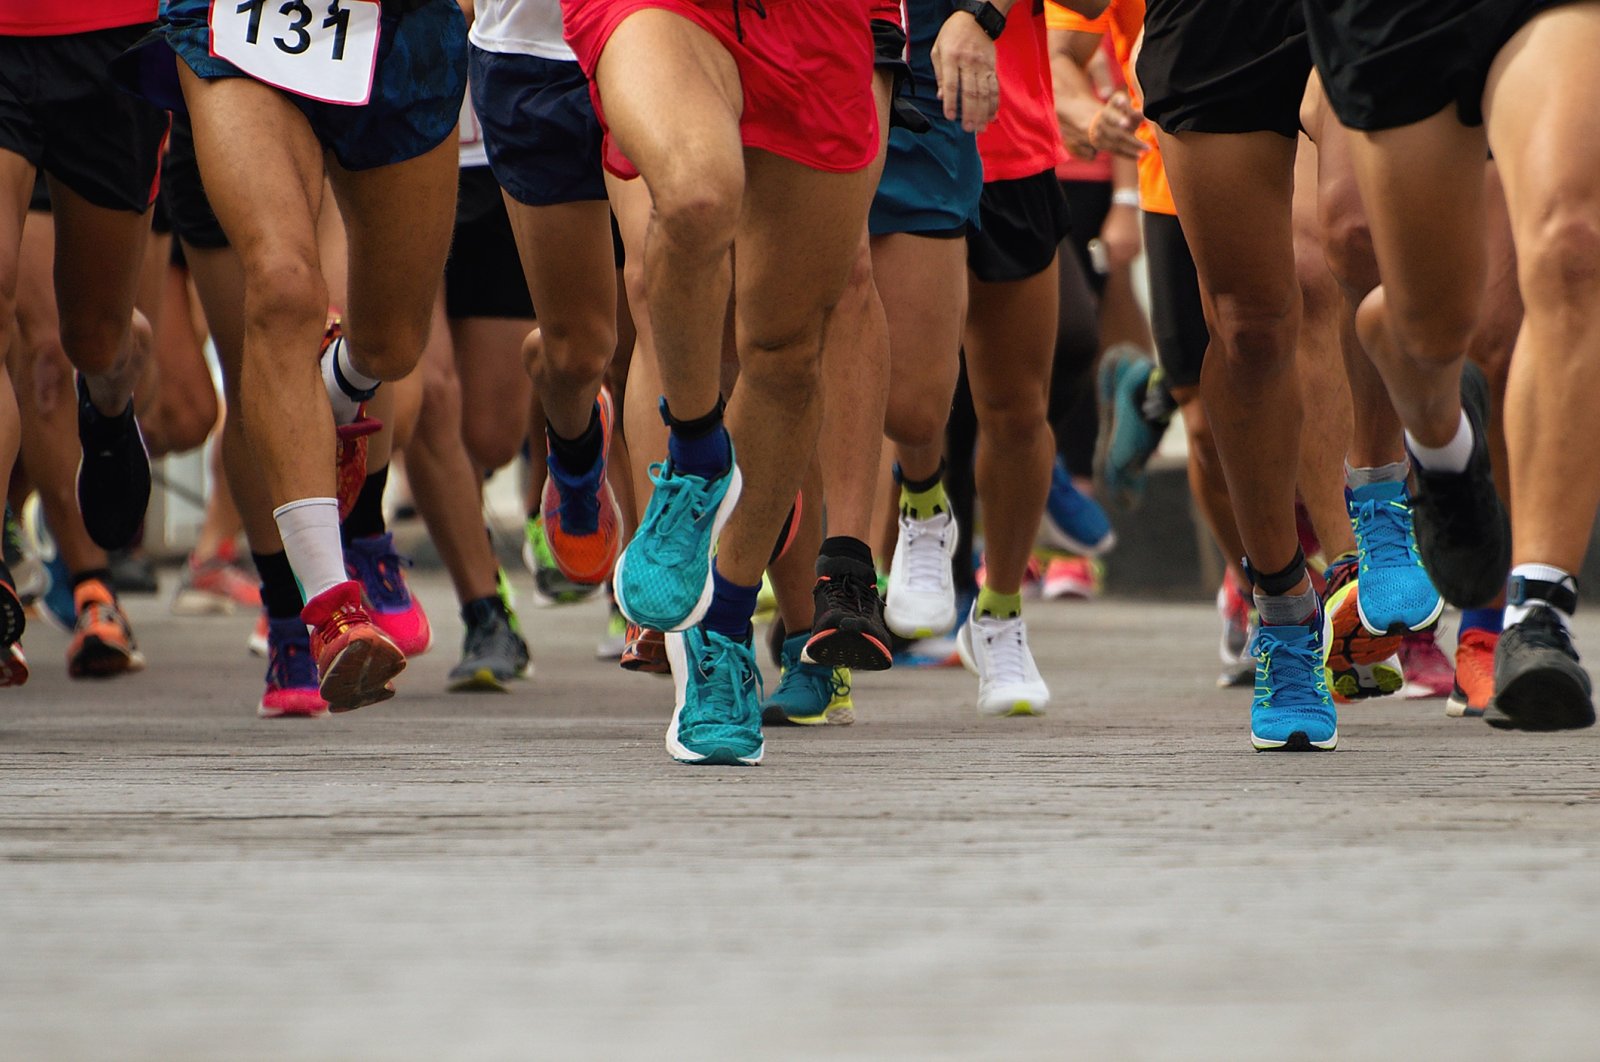 Preparing for a marathon is hard work, but the feeling of accomplishment is reward enough. (Shutterstock Photo)